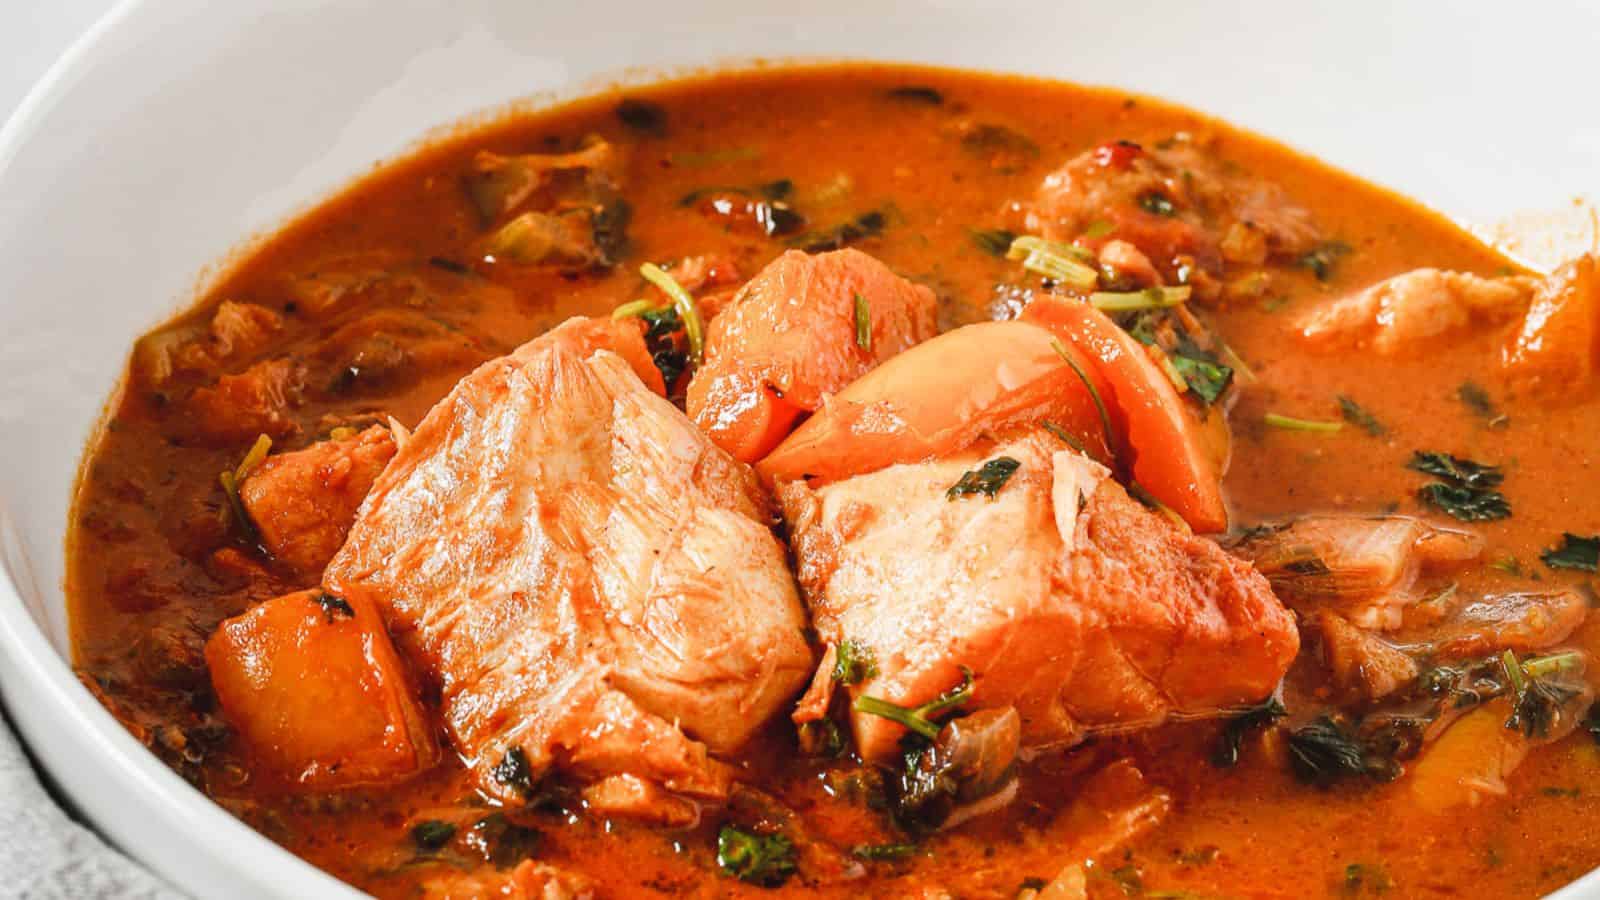 A bowl of stew with fish in it.